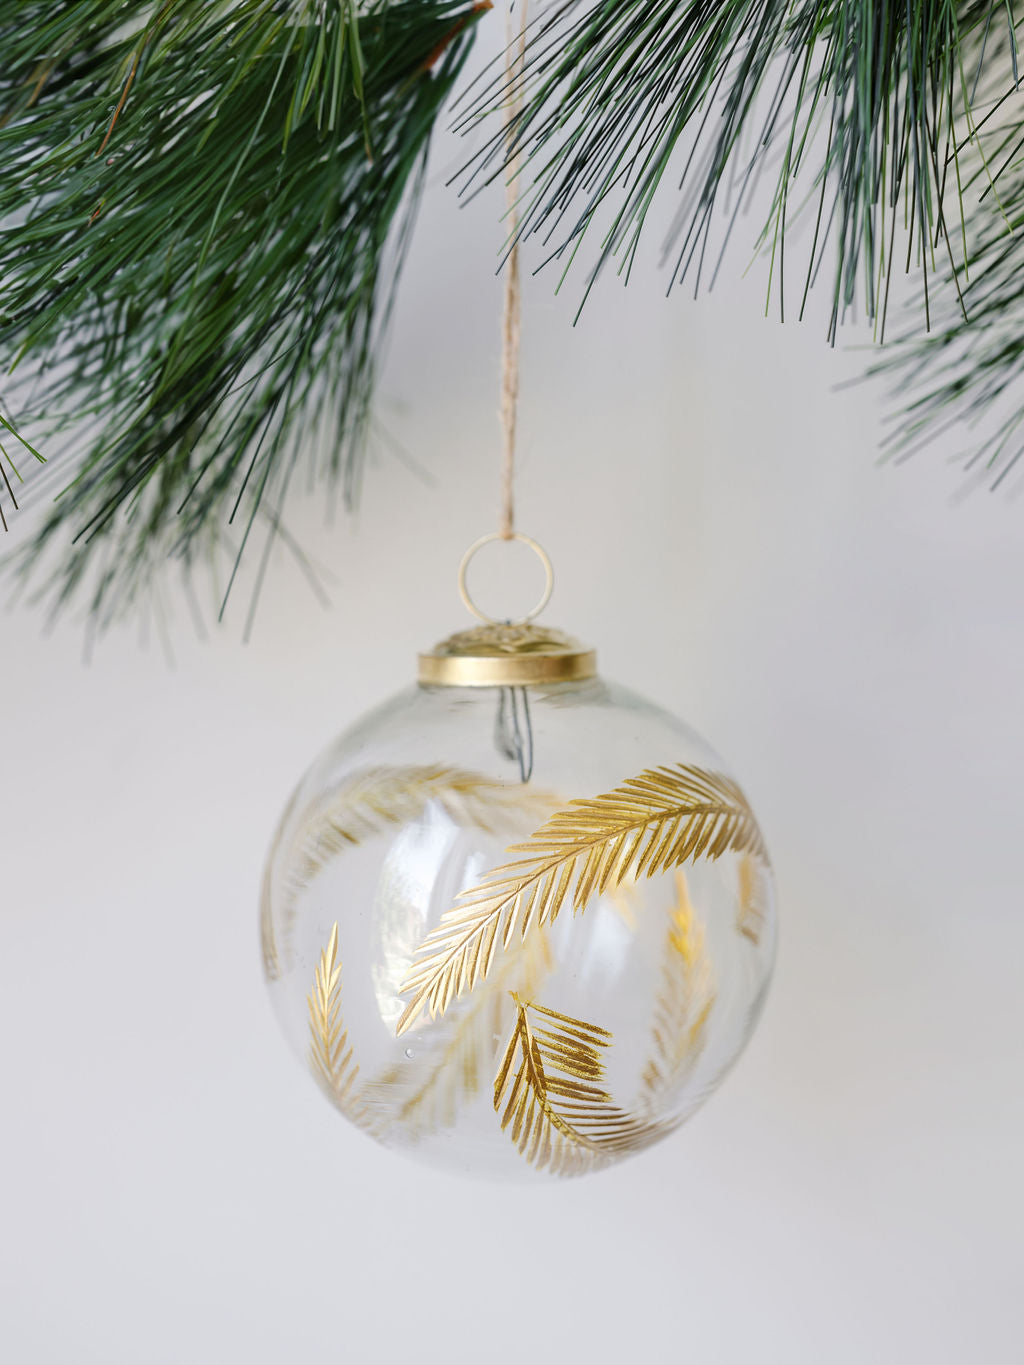 4" Handblown Gold Etched Glass Ornament